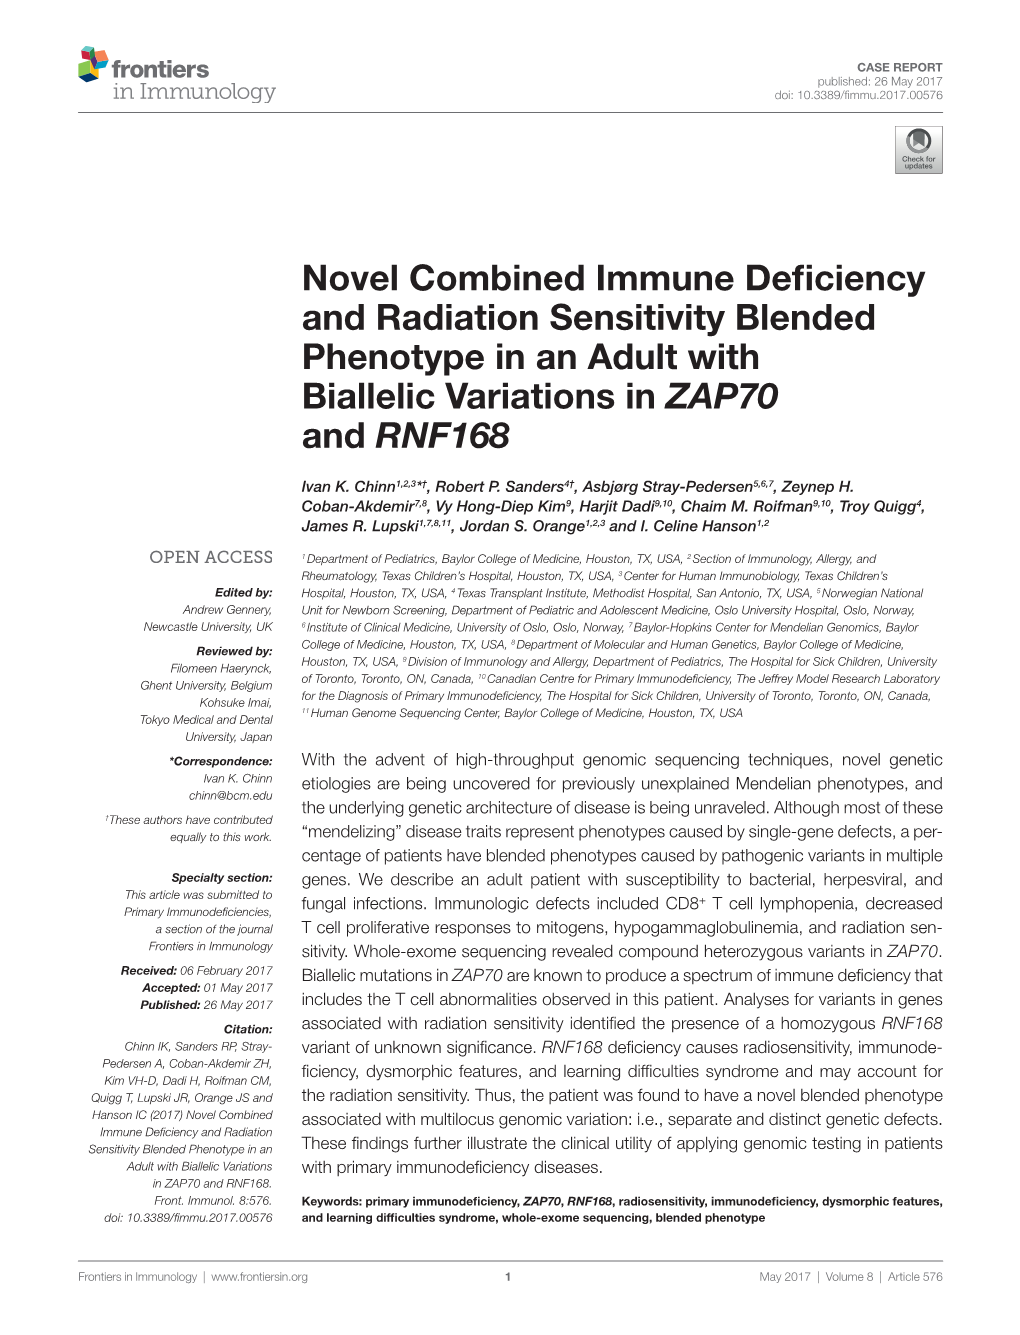 Novel Combined Immune Deficiency and Radiation Sensitivity Blended Phenotype in an Adult with Biallelic Variations in ZAP70 and RNF168